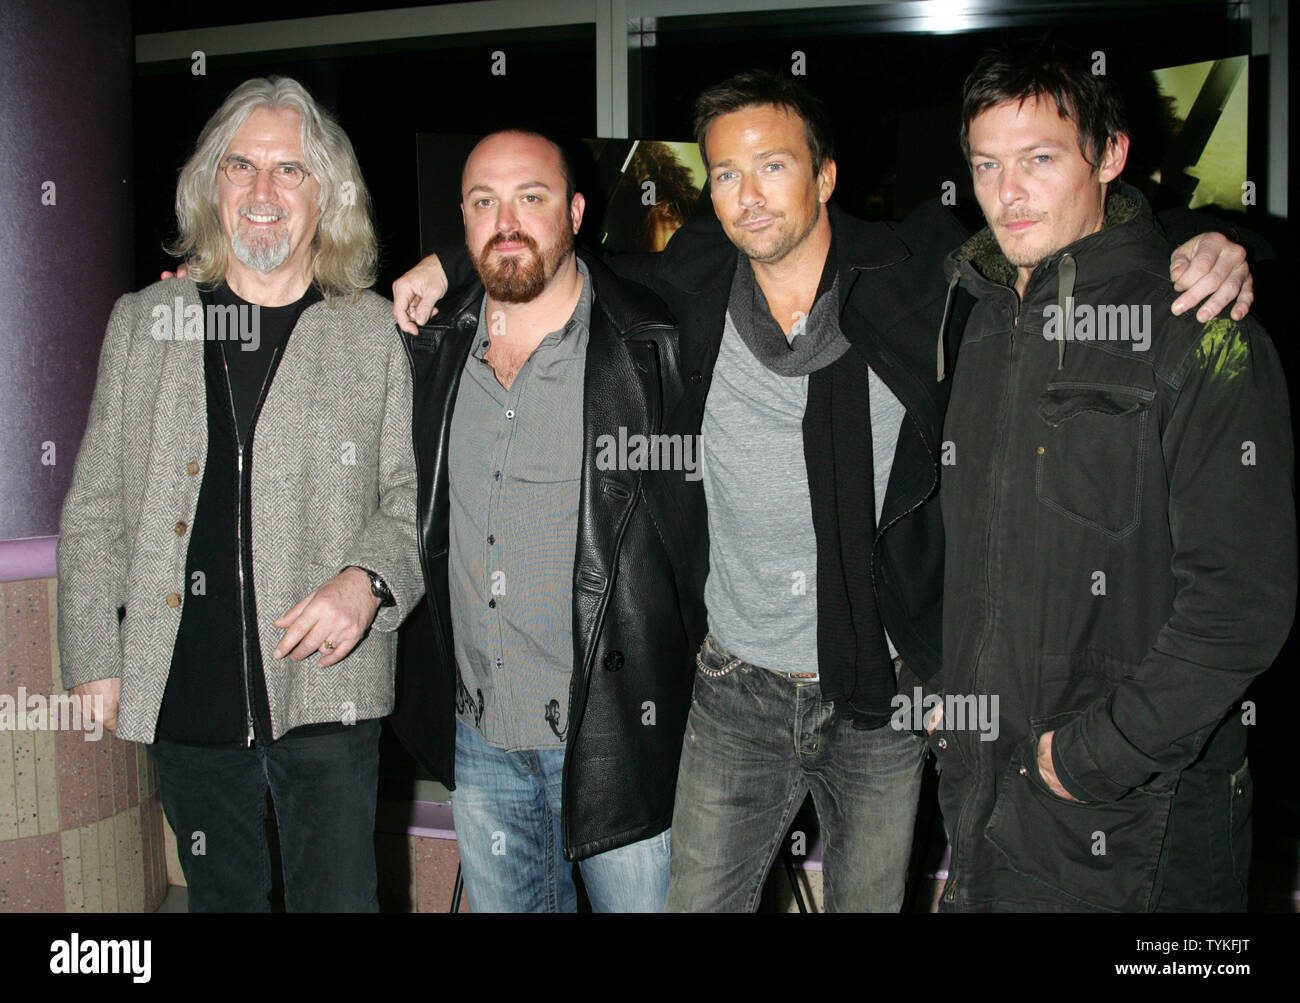 (L-R) Billy Connolly, Troy Duffy, Sean Patrick Flanery and Norman Reedus arrive for the premiere of 'The Boondock Saints II: All Saints Day' at the Regal Union Square Theater in New York on October 20, 2009.       UPI /Laura Cavanaugh Stock Photo